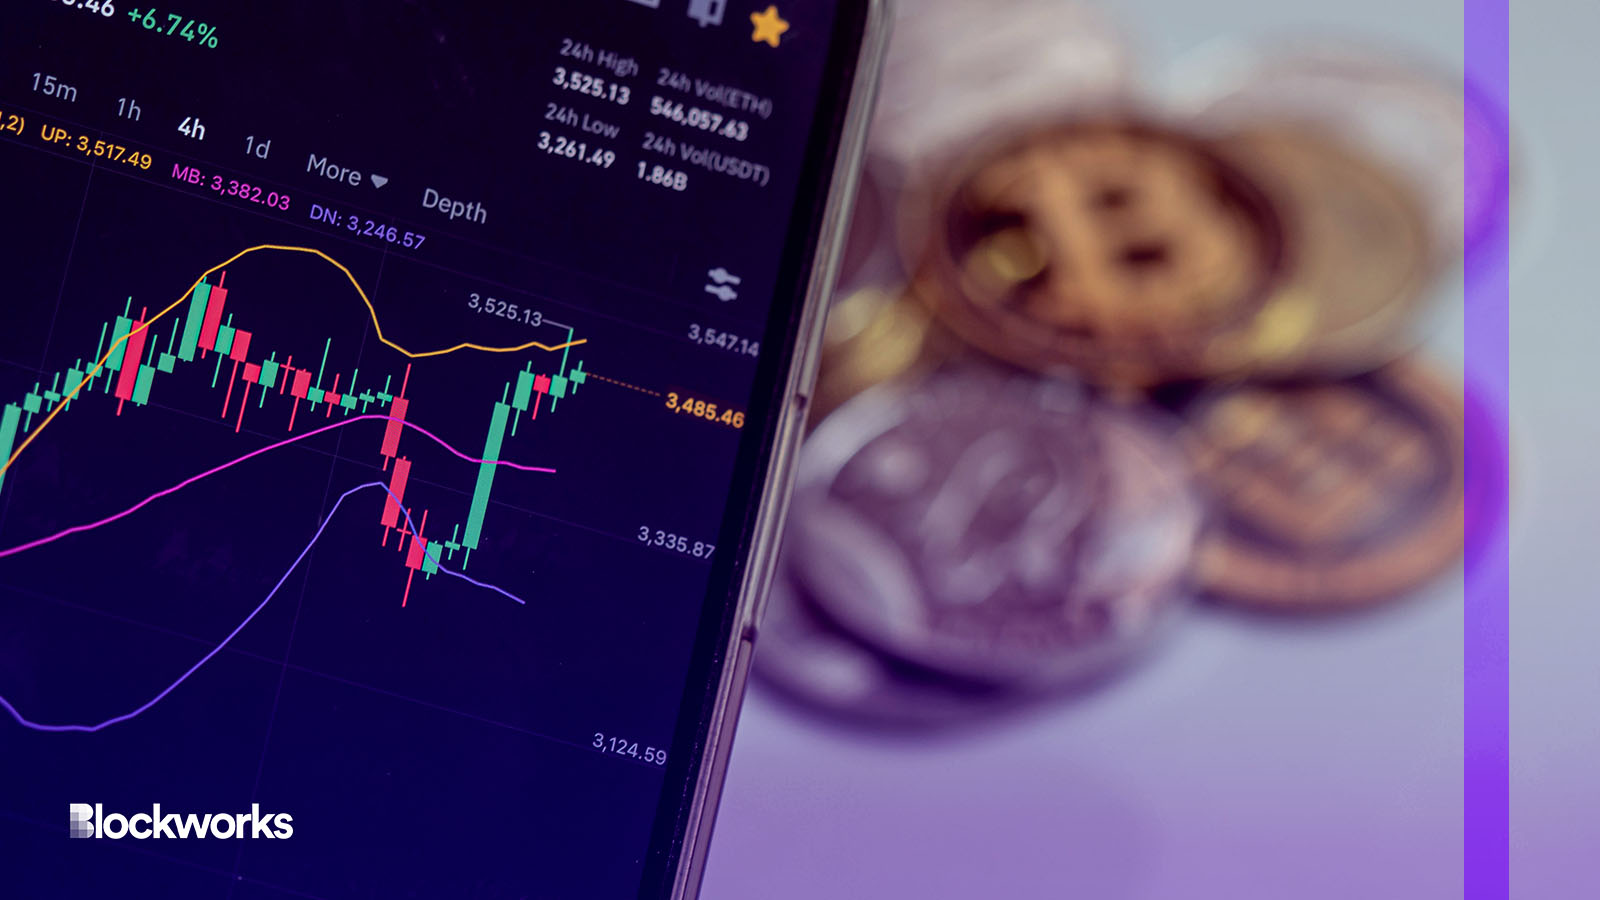 Stocks and Crypto Correlation Shows Signs of Weakening